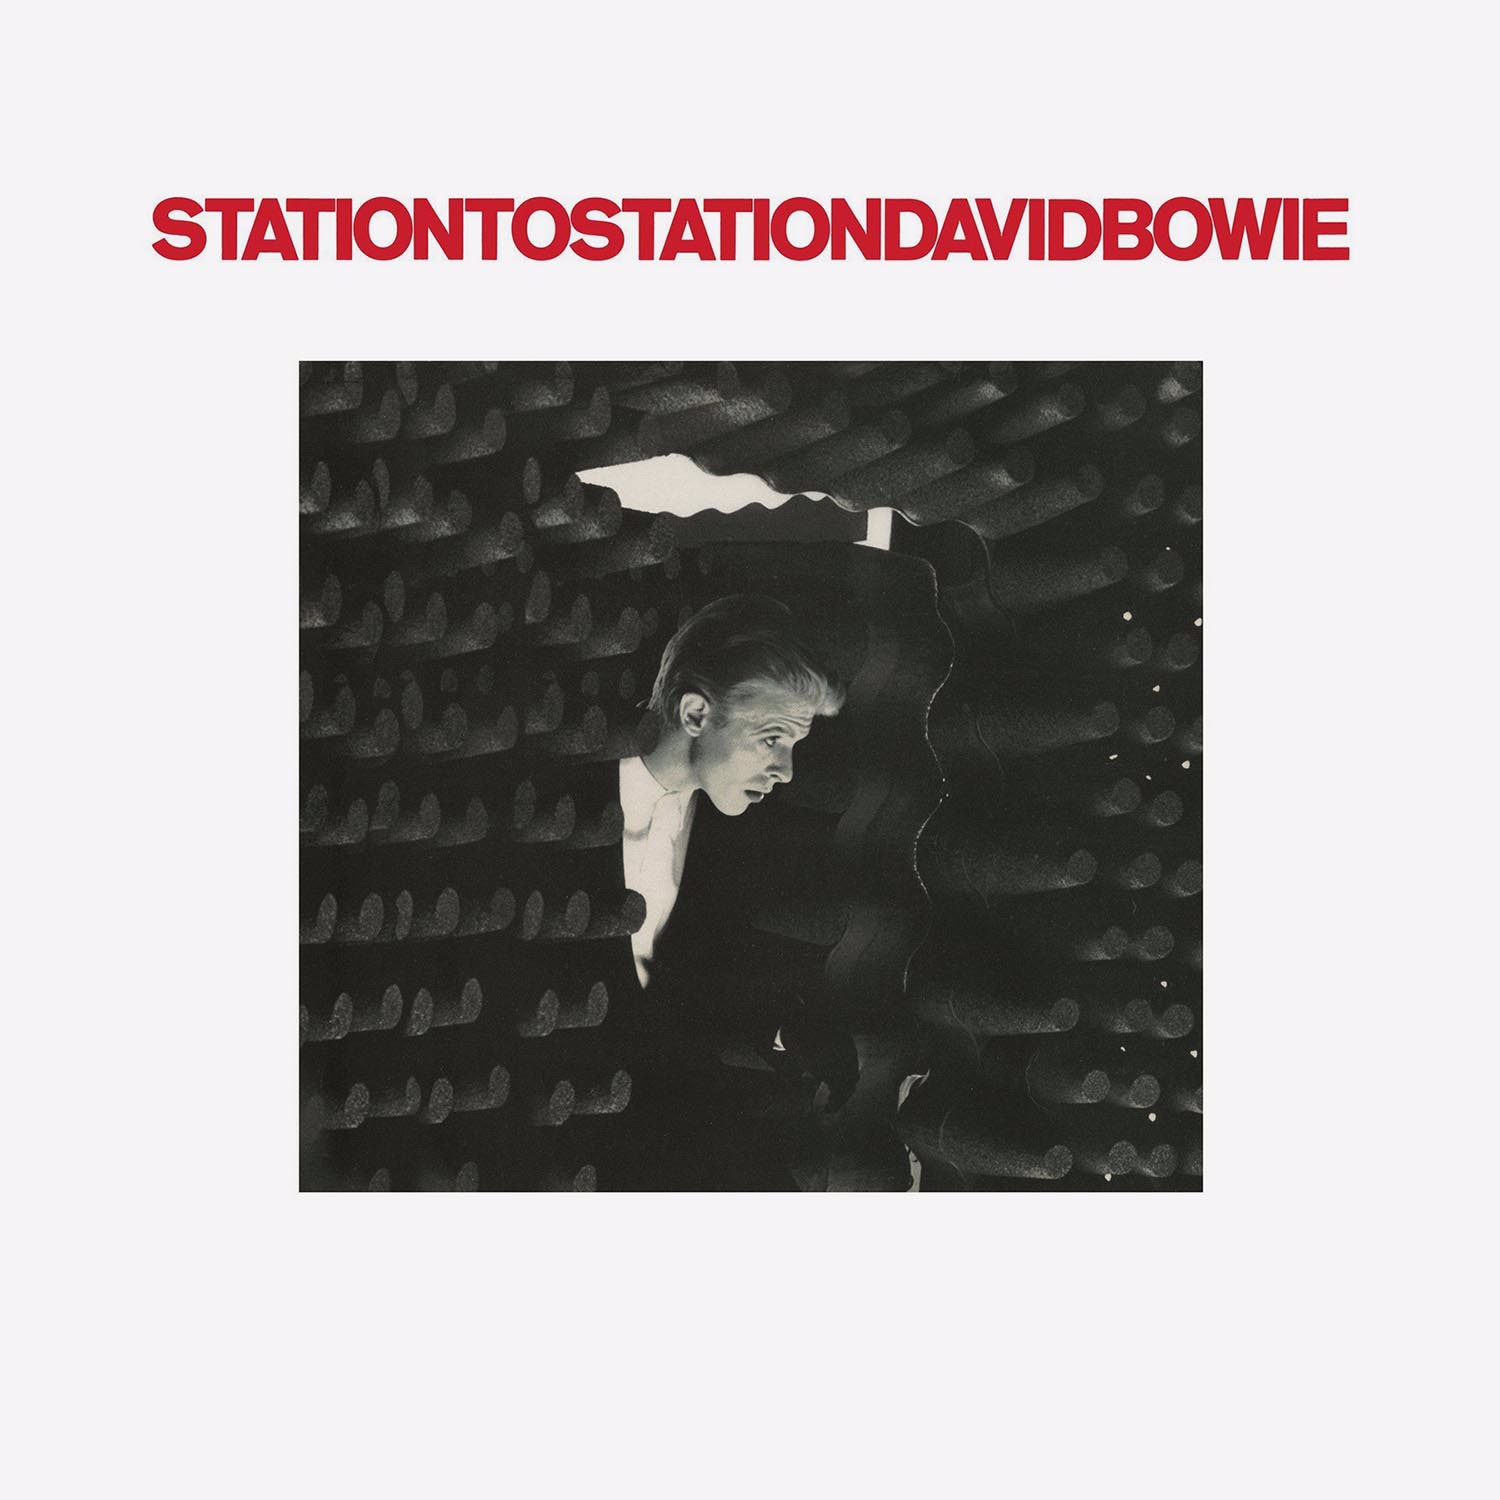 david_bowie__station_to_station_45th_anniversary_limited_colour_180_gr_5061209295-1.jpg.08ab84877e2a9974df0d4ea145ee3e99.jpg